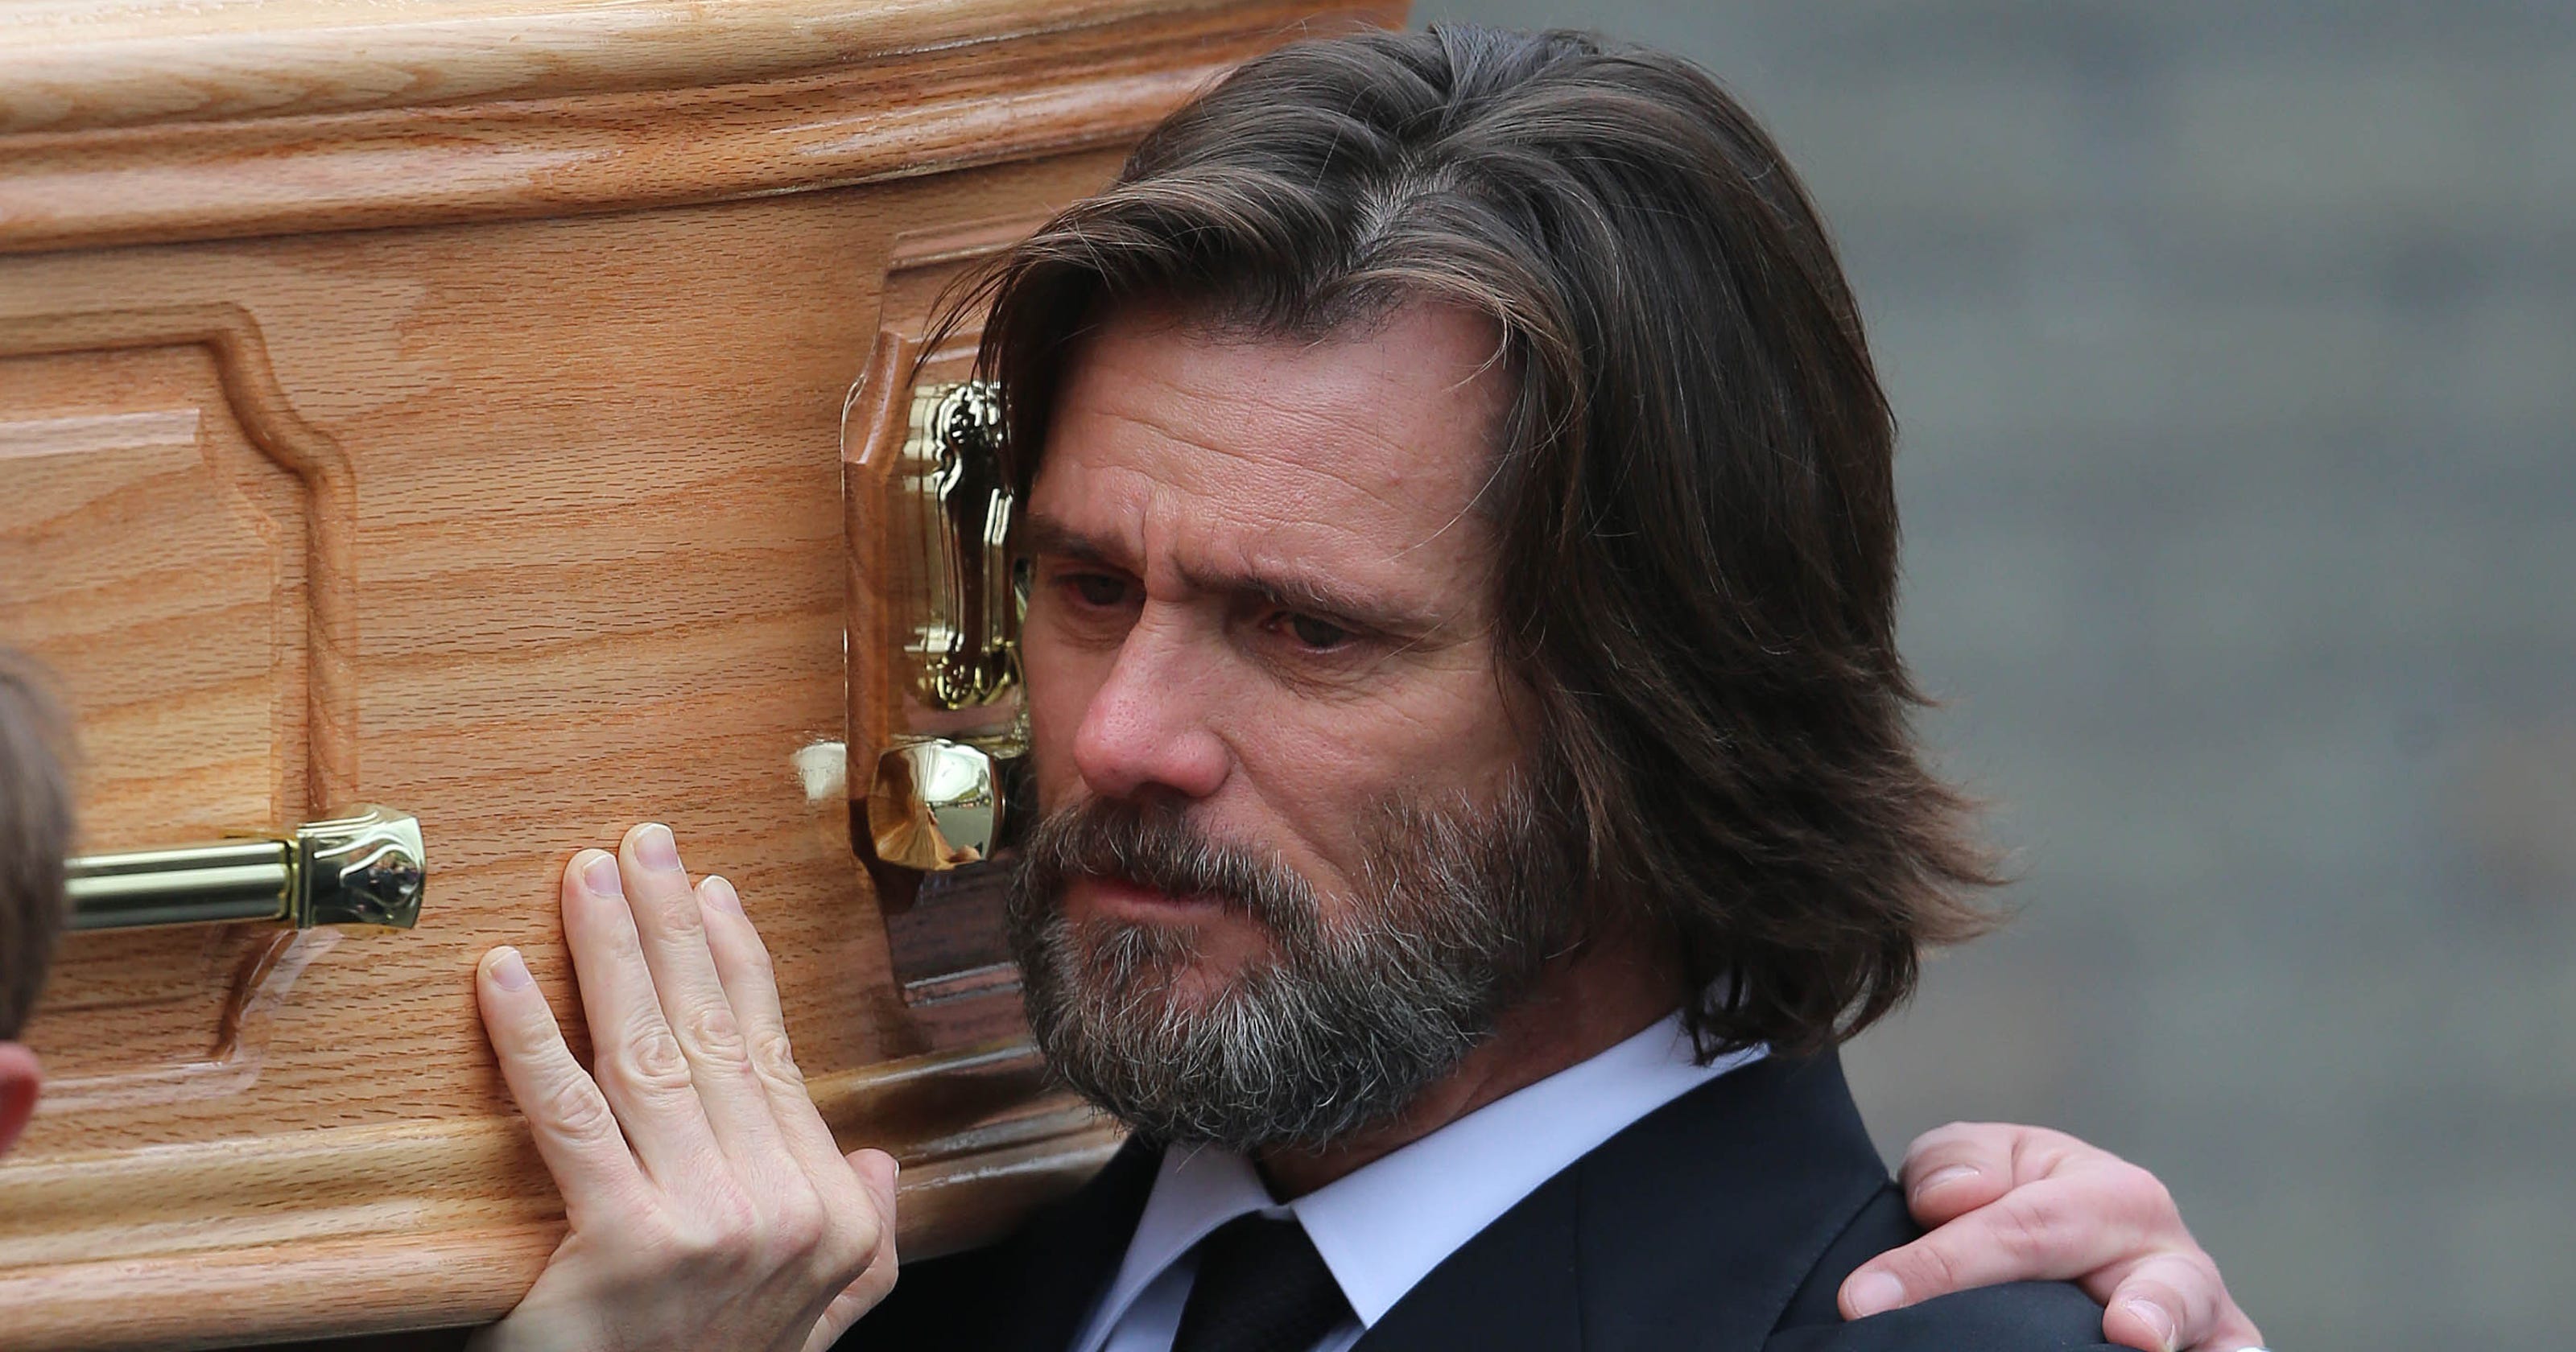 Jim Carrey responds to wrongful death lawsuit